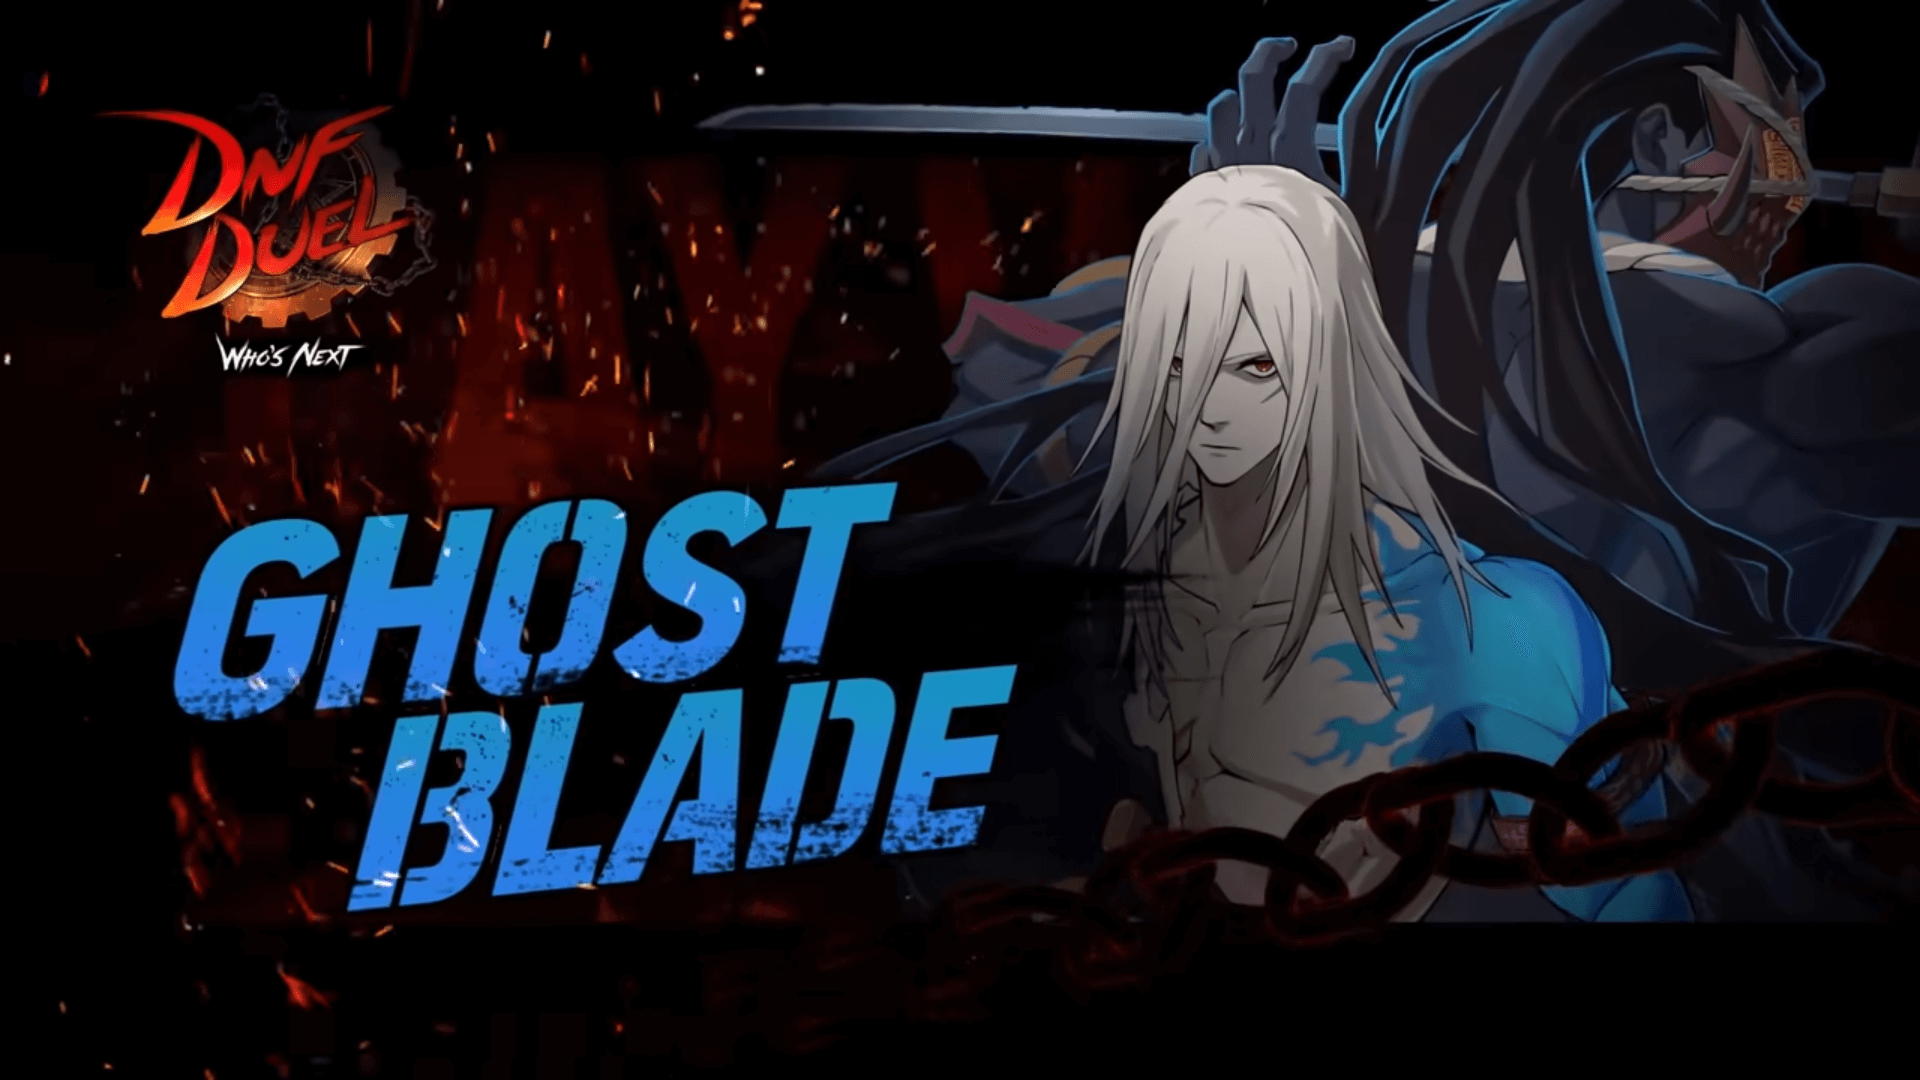 Ghostblade is a New Character for DNF Duel